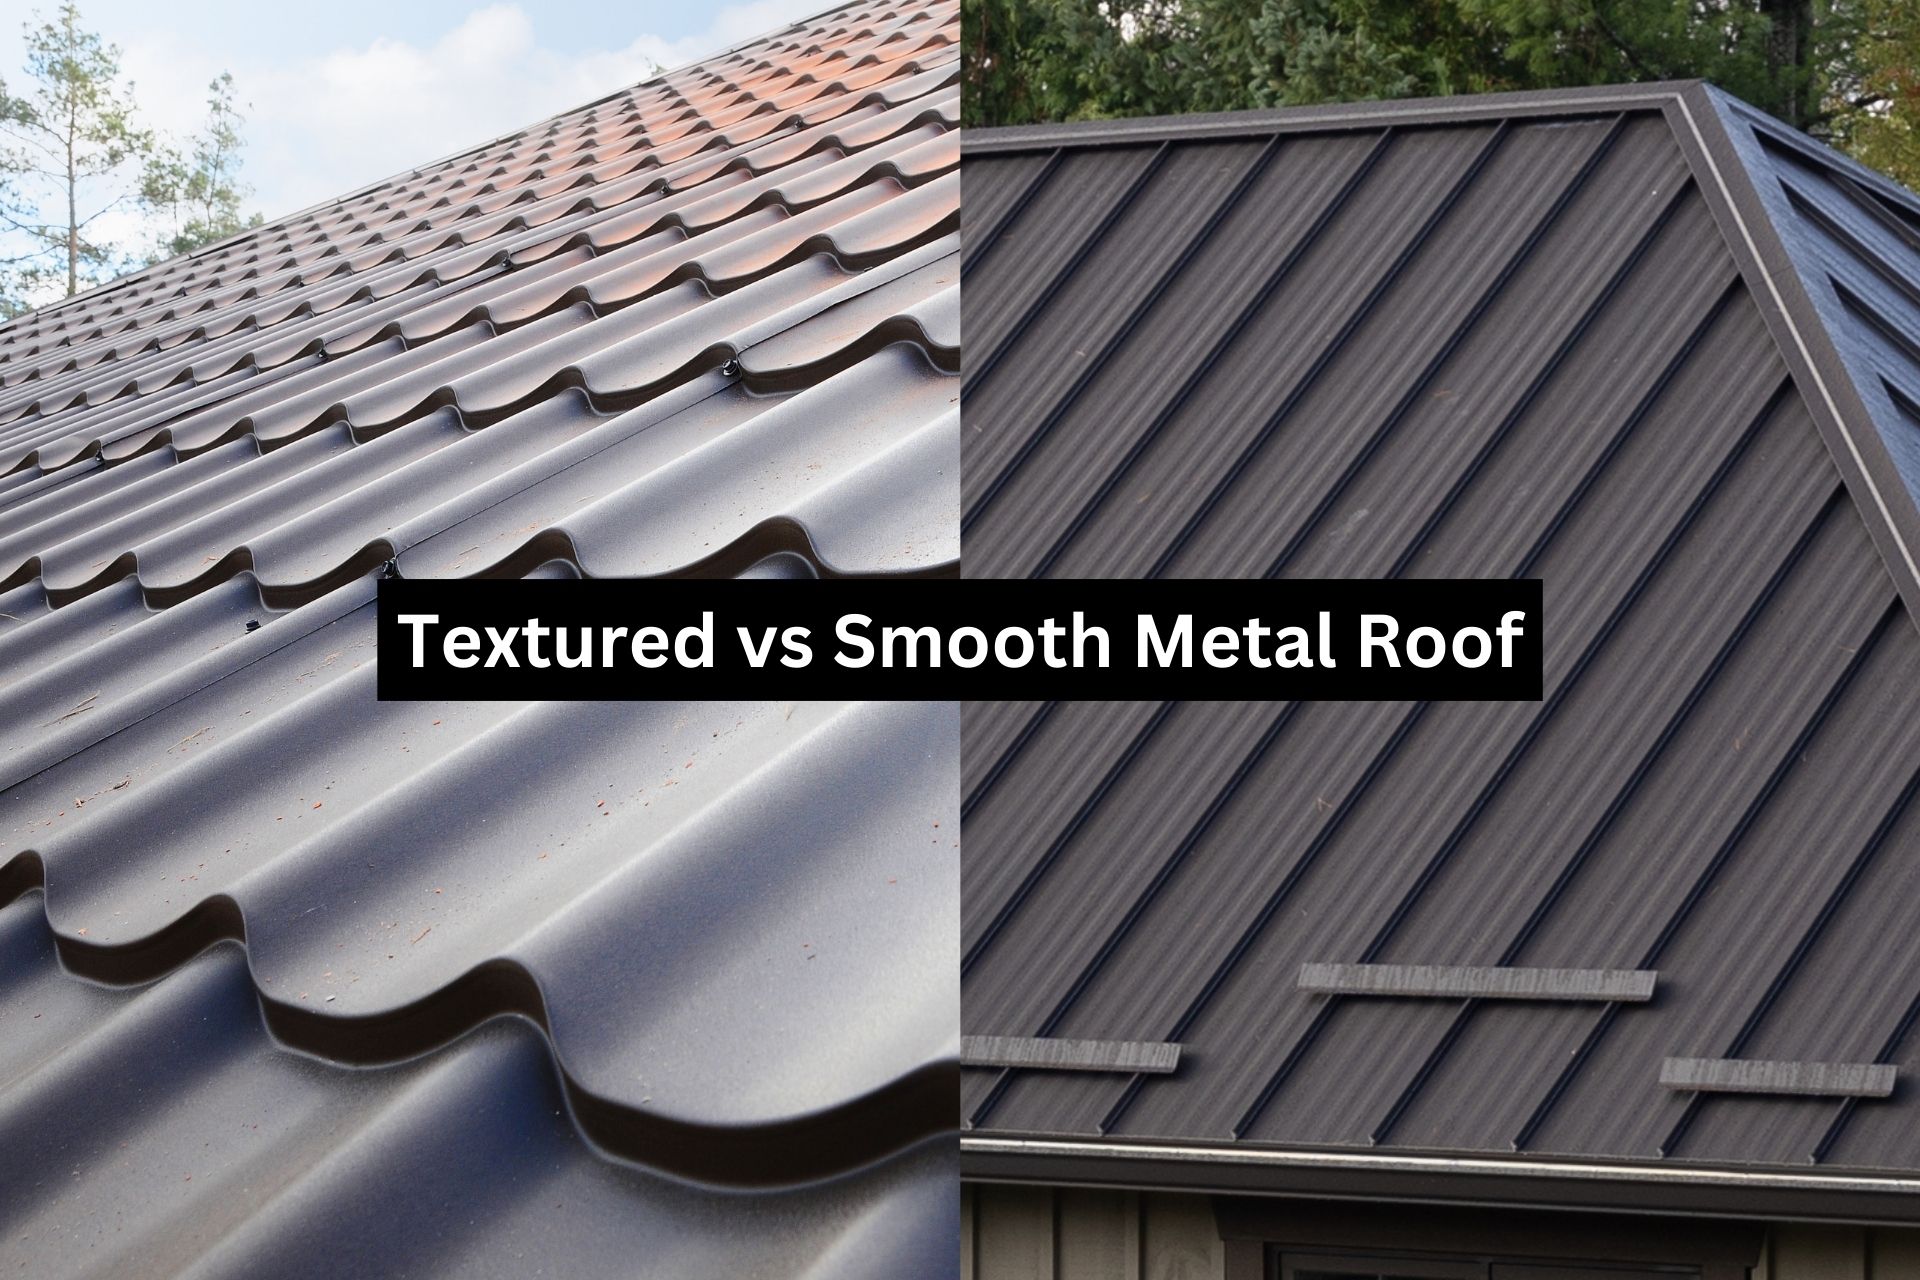 Textured vs Smooth metal roof